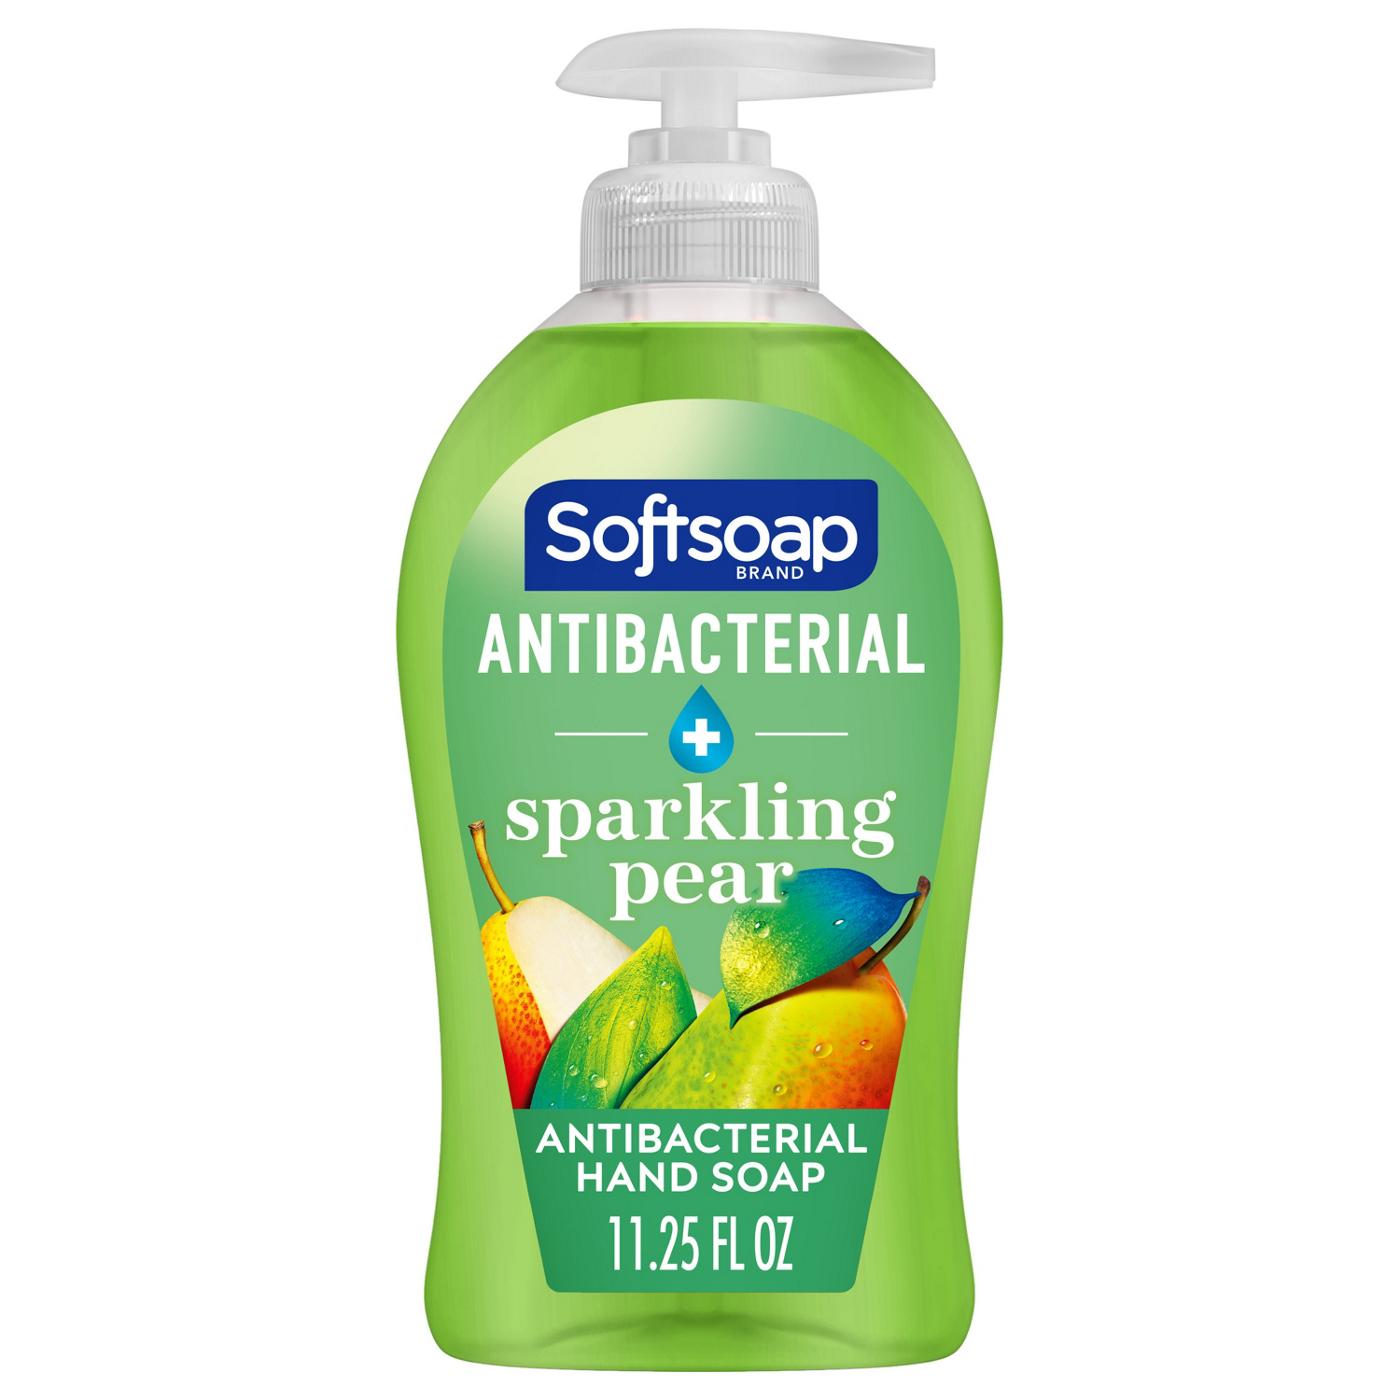 Softsoap Antibacterial Hand Soap - Sparkling Pear; image 1 of 4